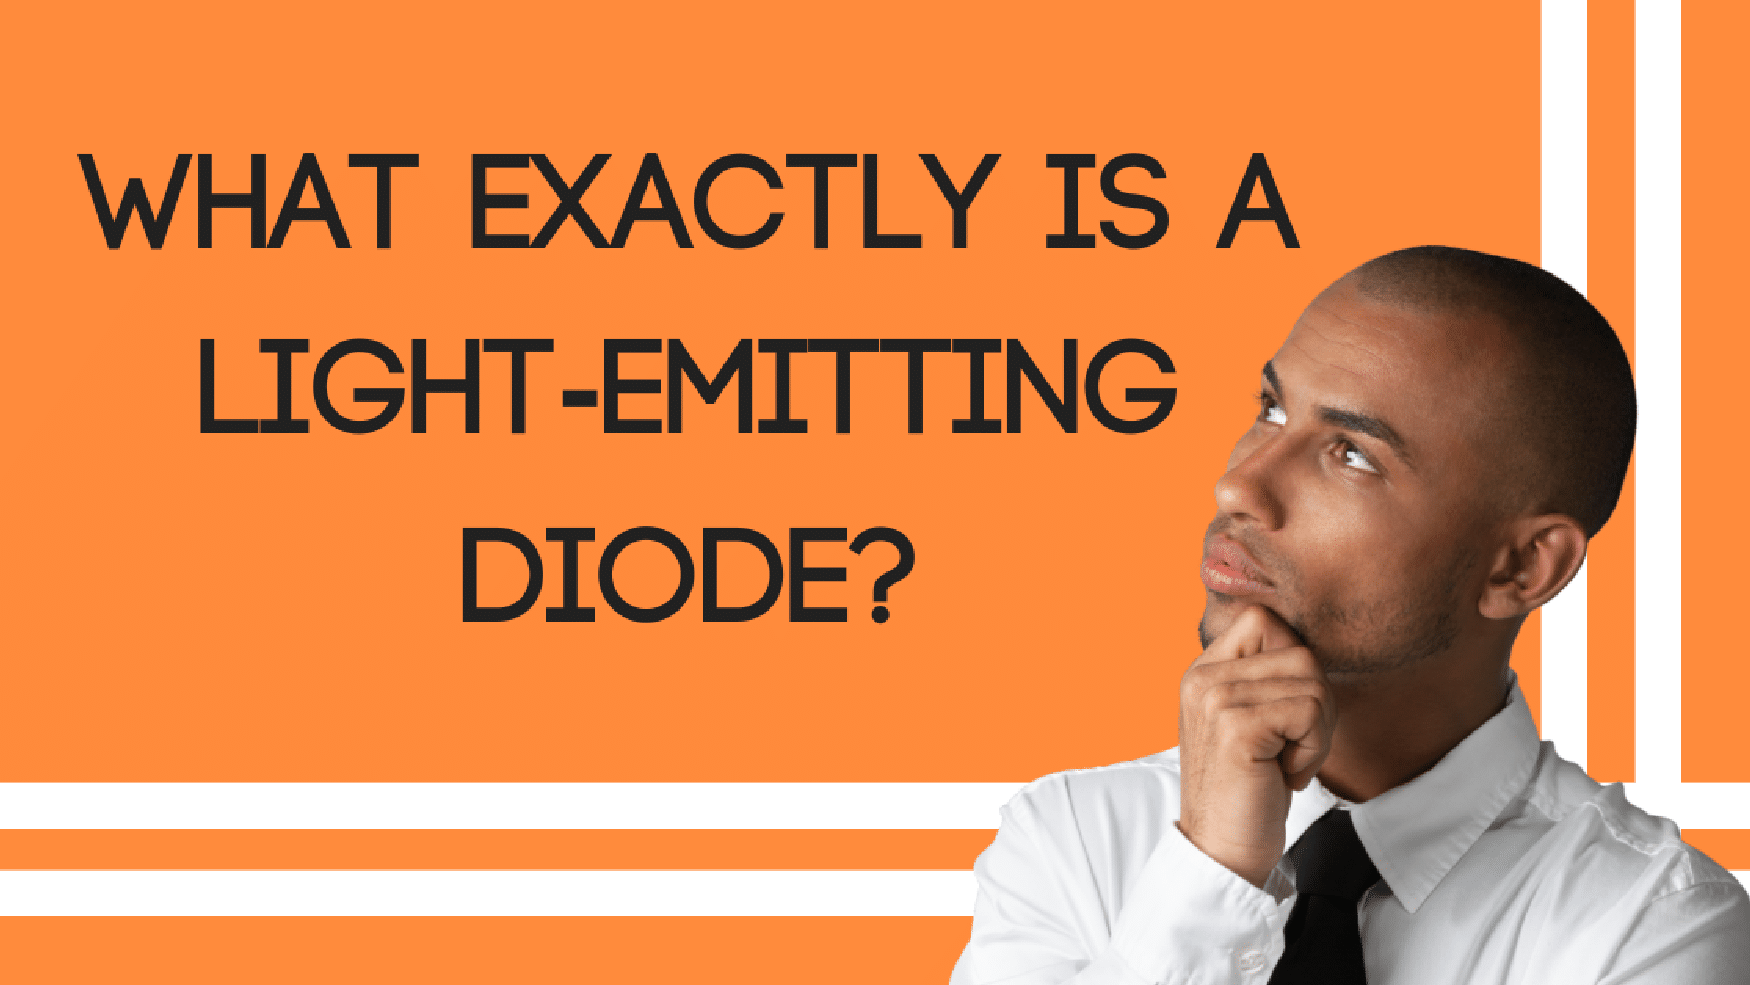 Who Invented LED or the Light Emitting Diode?